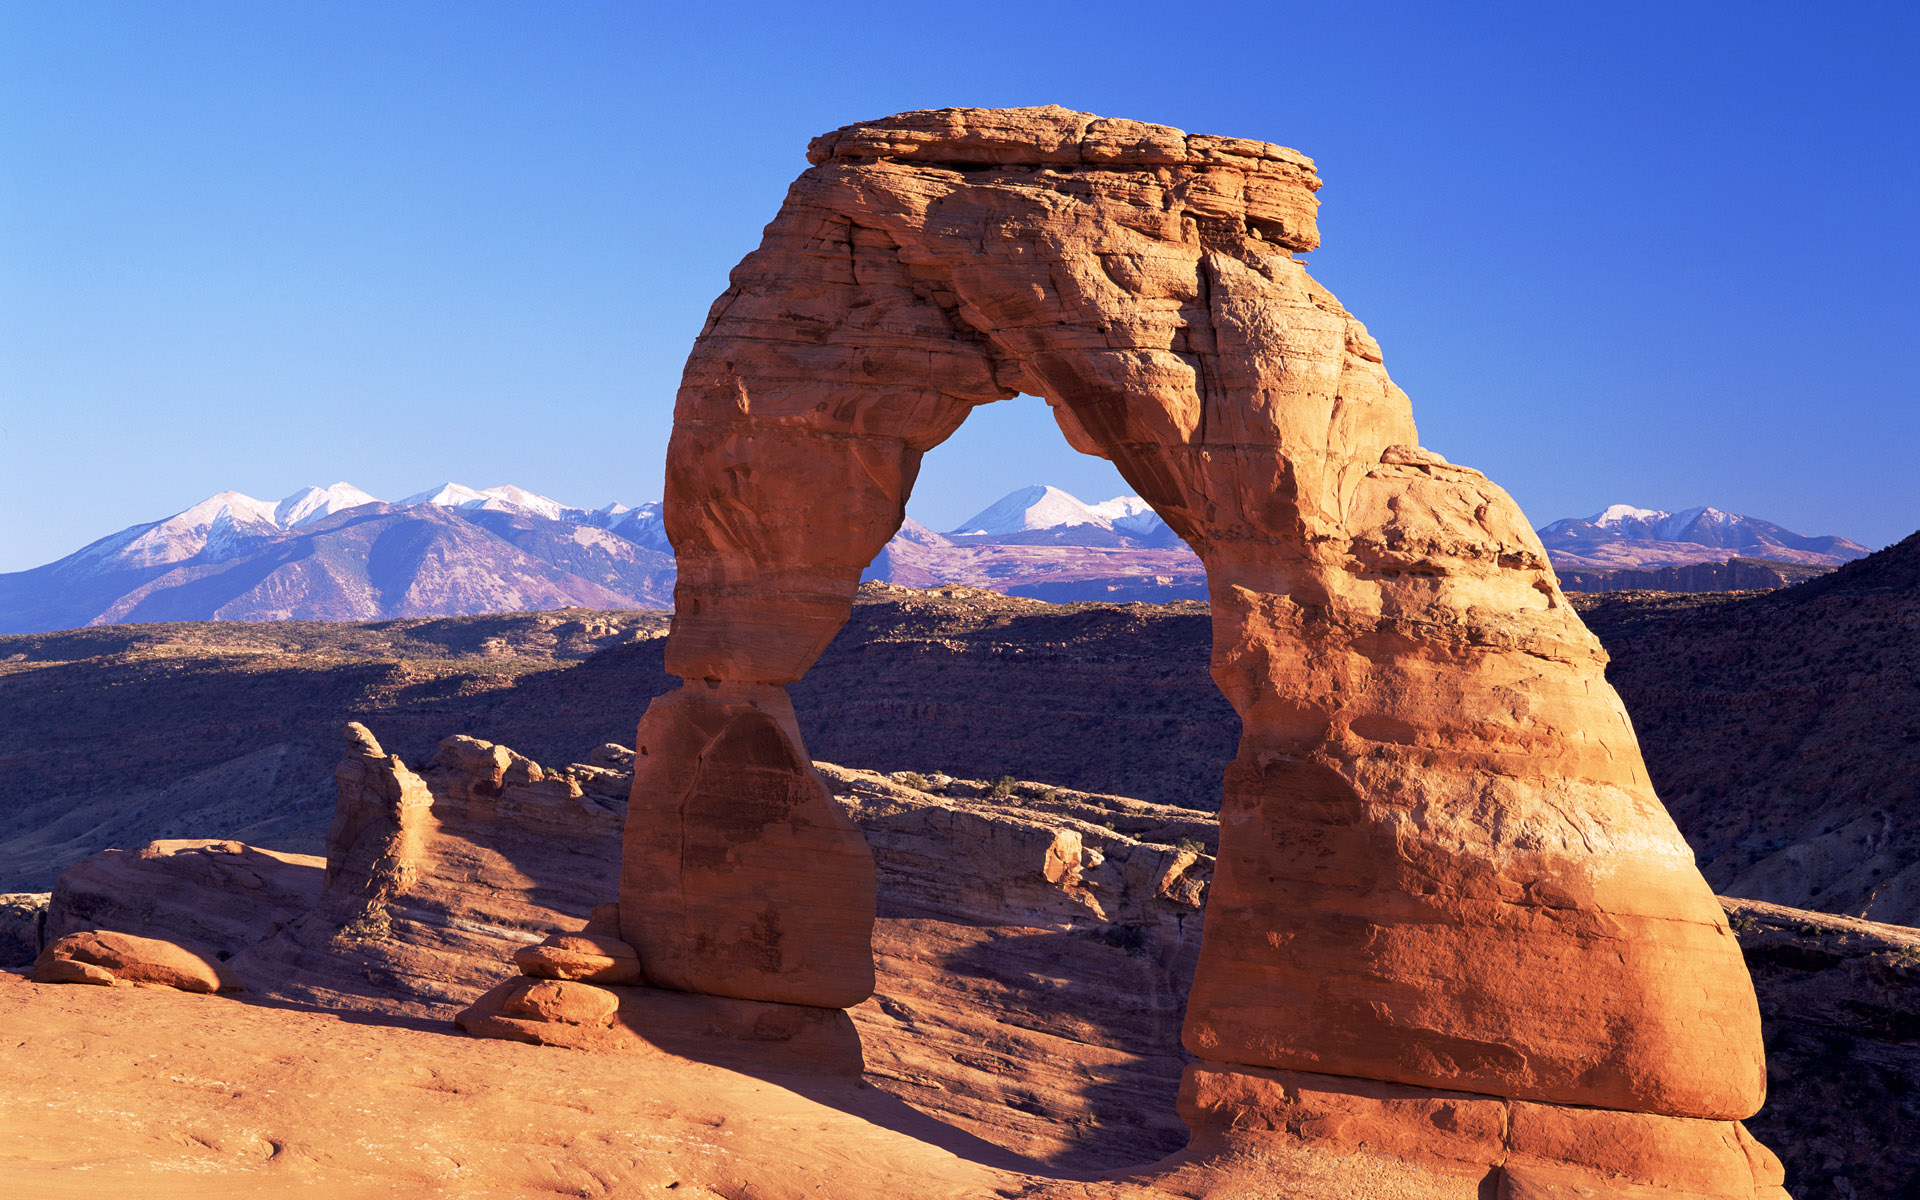 Park Utah USA is a great wallpaper for your computer desktop